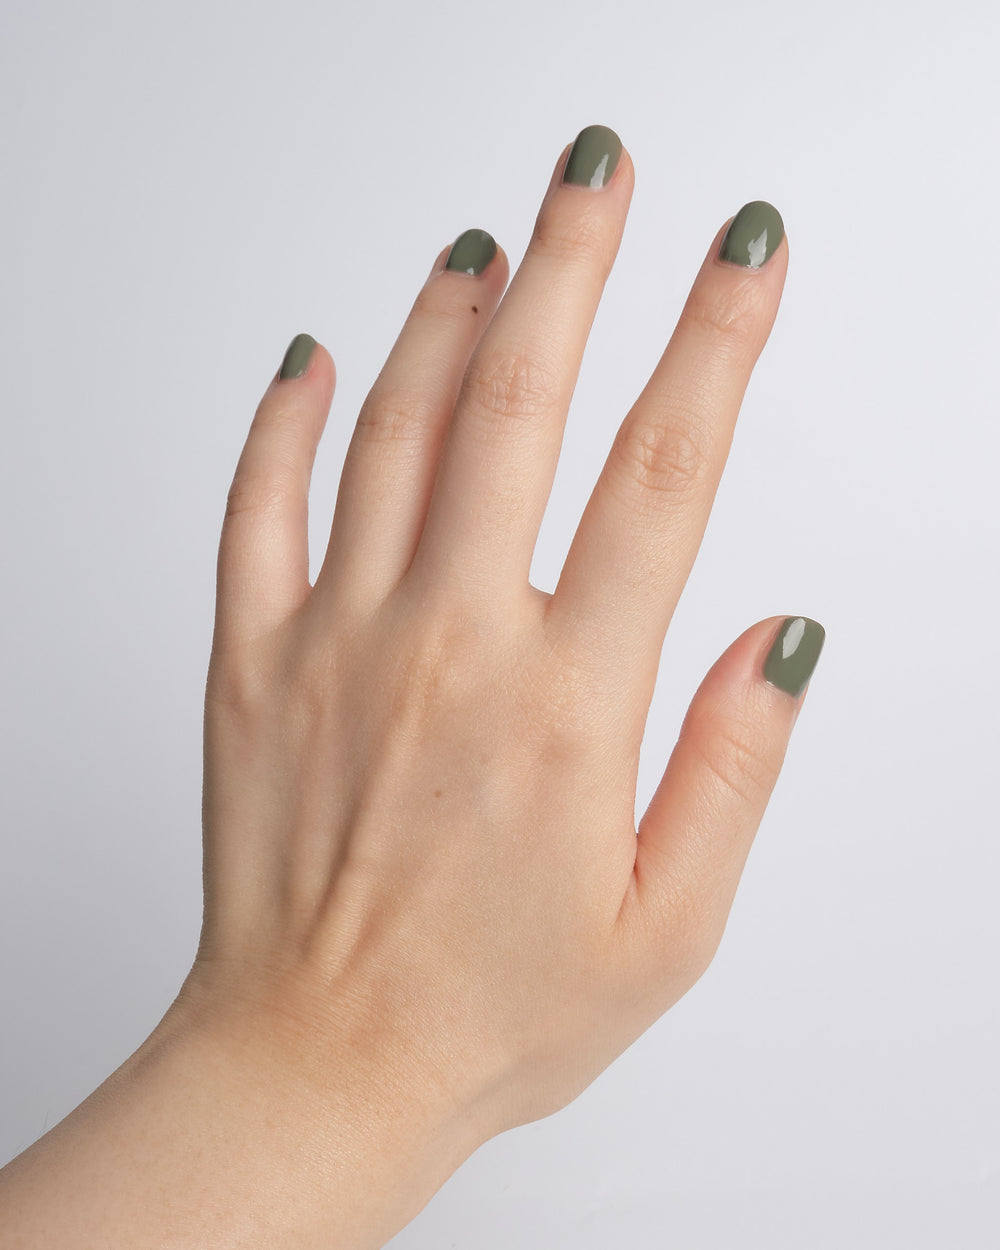 C5 Moss • WATERBASED NAIL COLOUR